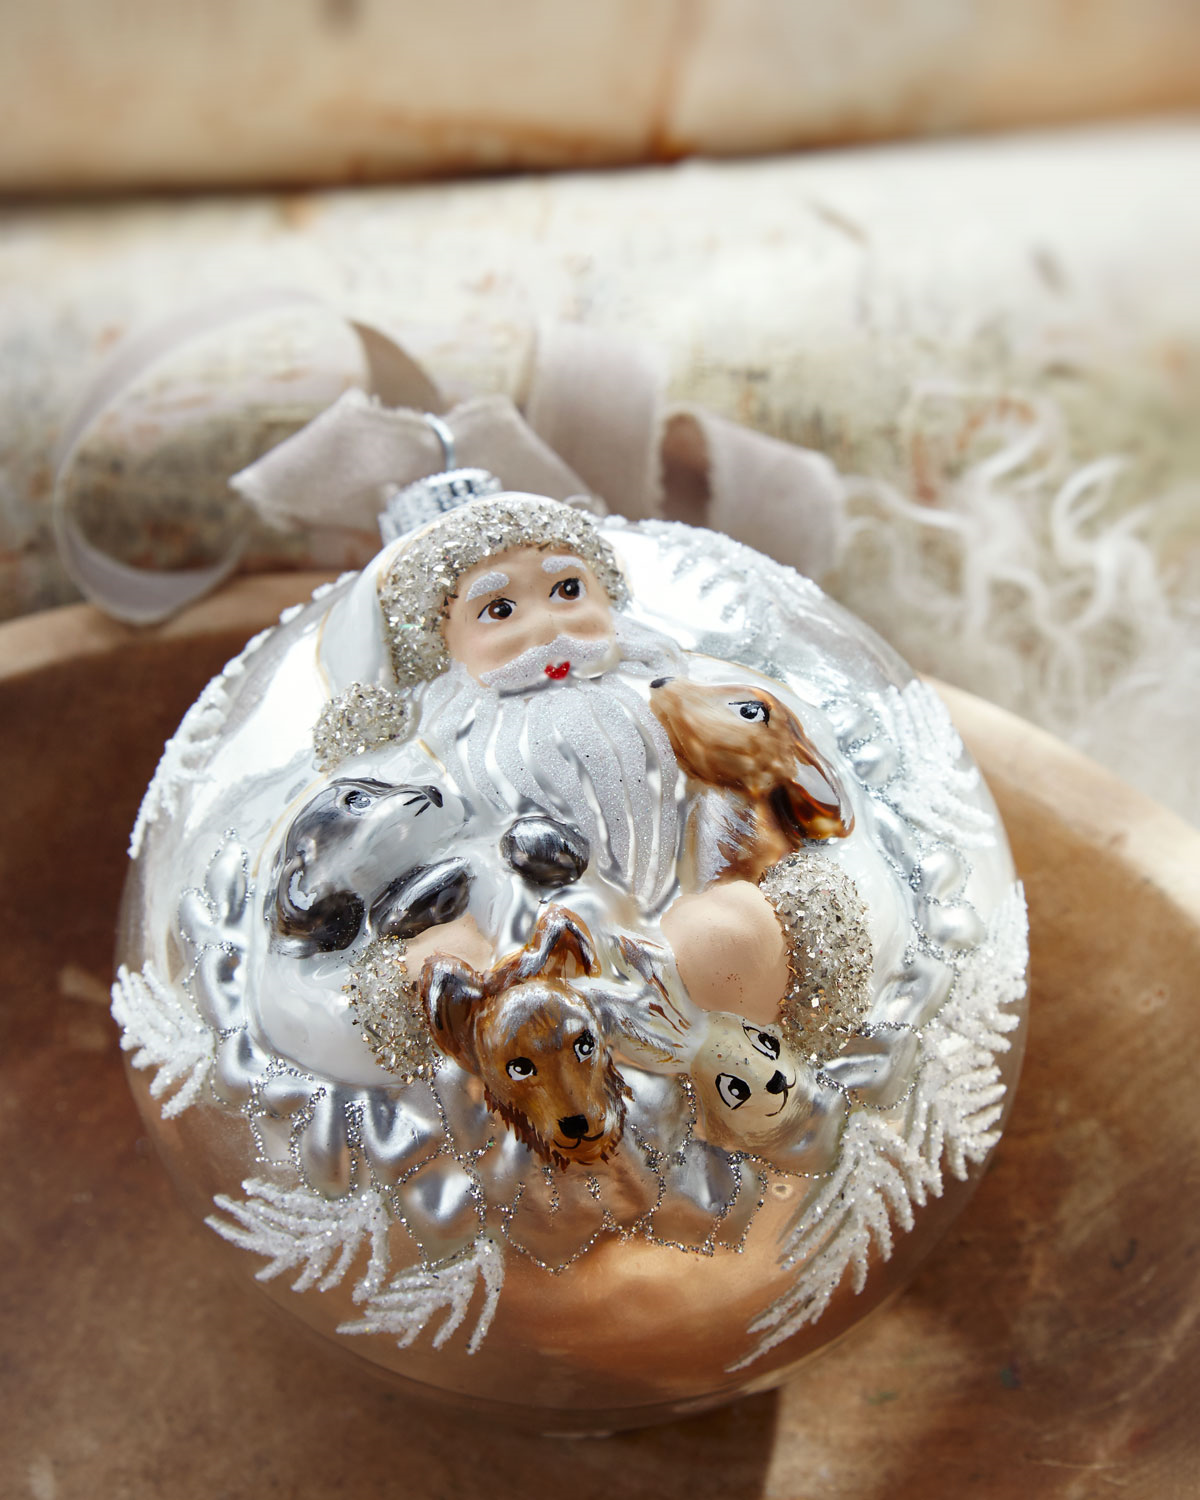 Fireplace Stones Decorative Awesome Neiman Marcus Ball Christmas ornament with Santa and Friends $45 W Tax